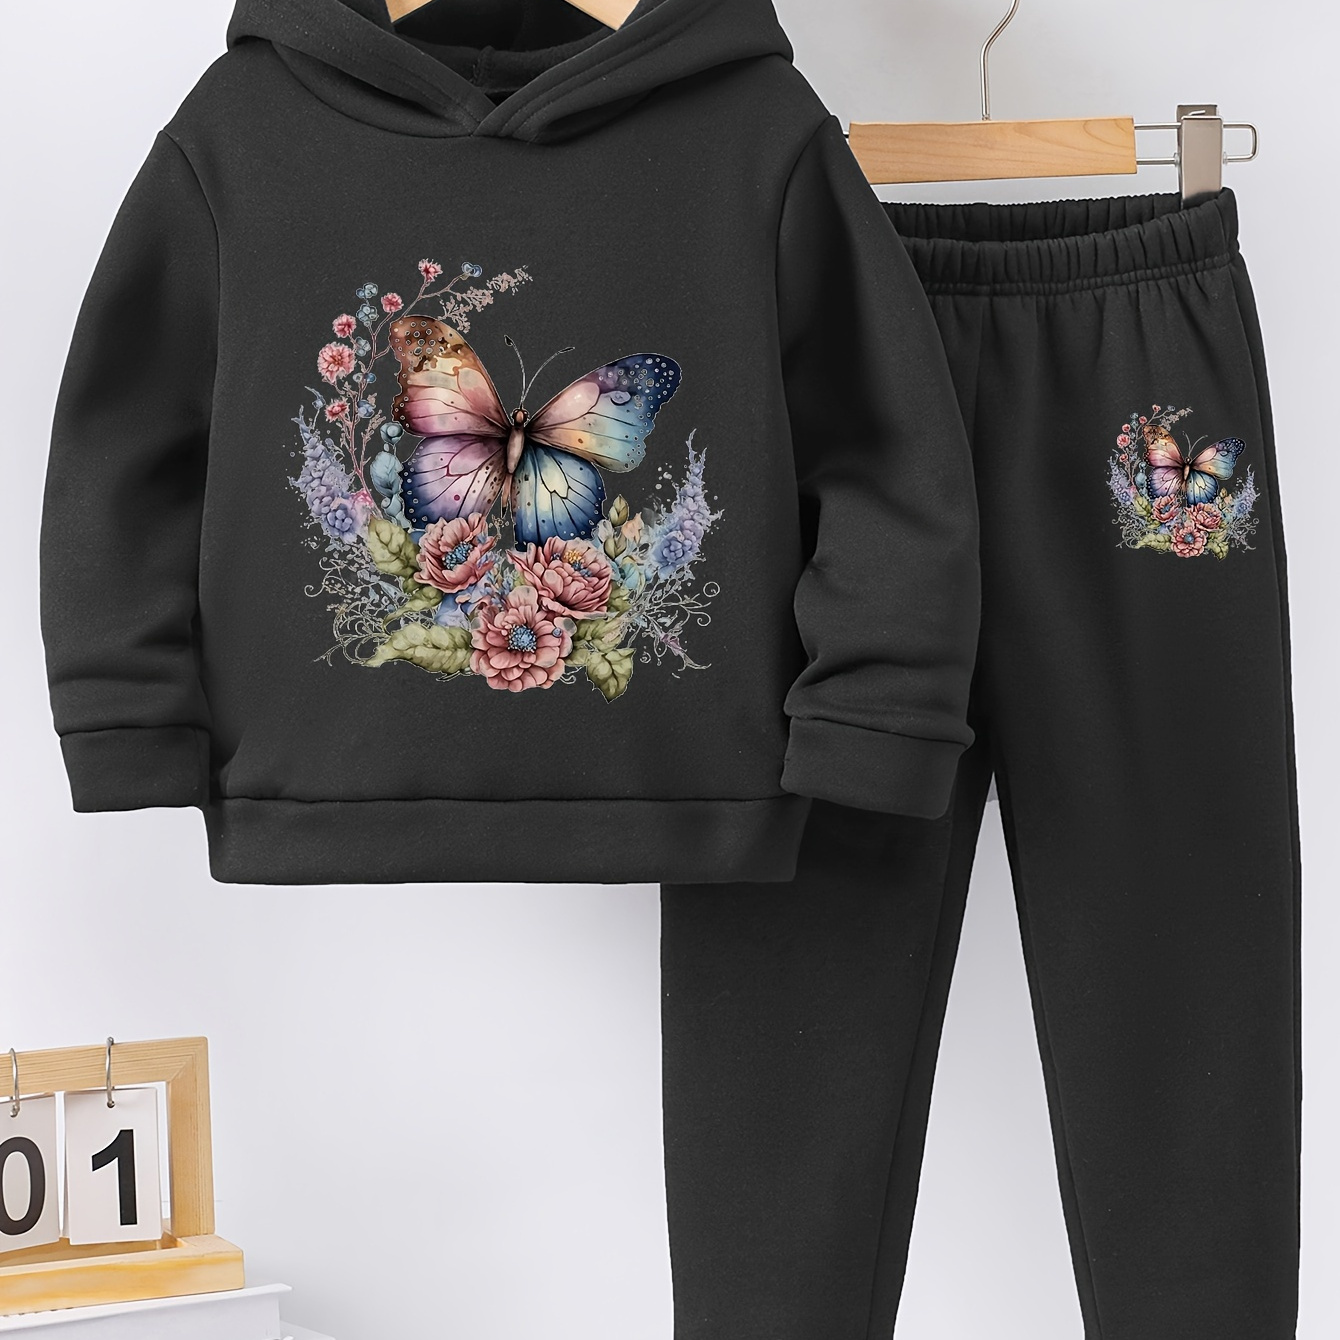 

Girls' 2pcs Hoodie & Sweatpants Set, Cartoon Floral Butterfly Print, Comfortable Fashion Tracksuit, Spring/autumn Outfit